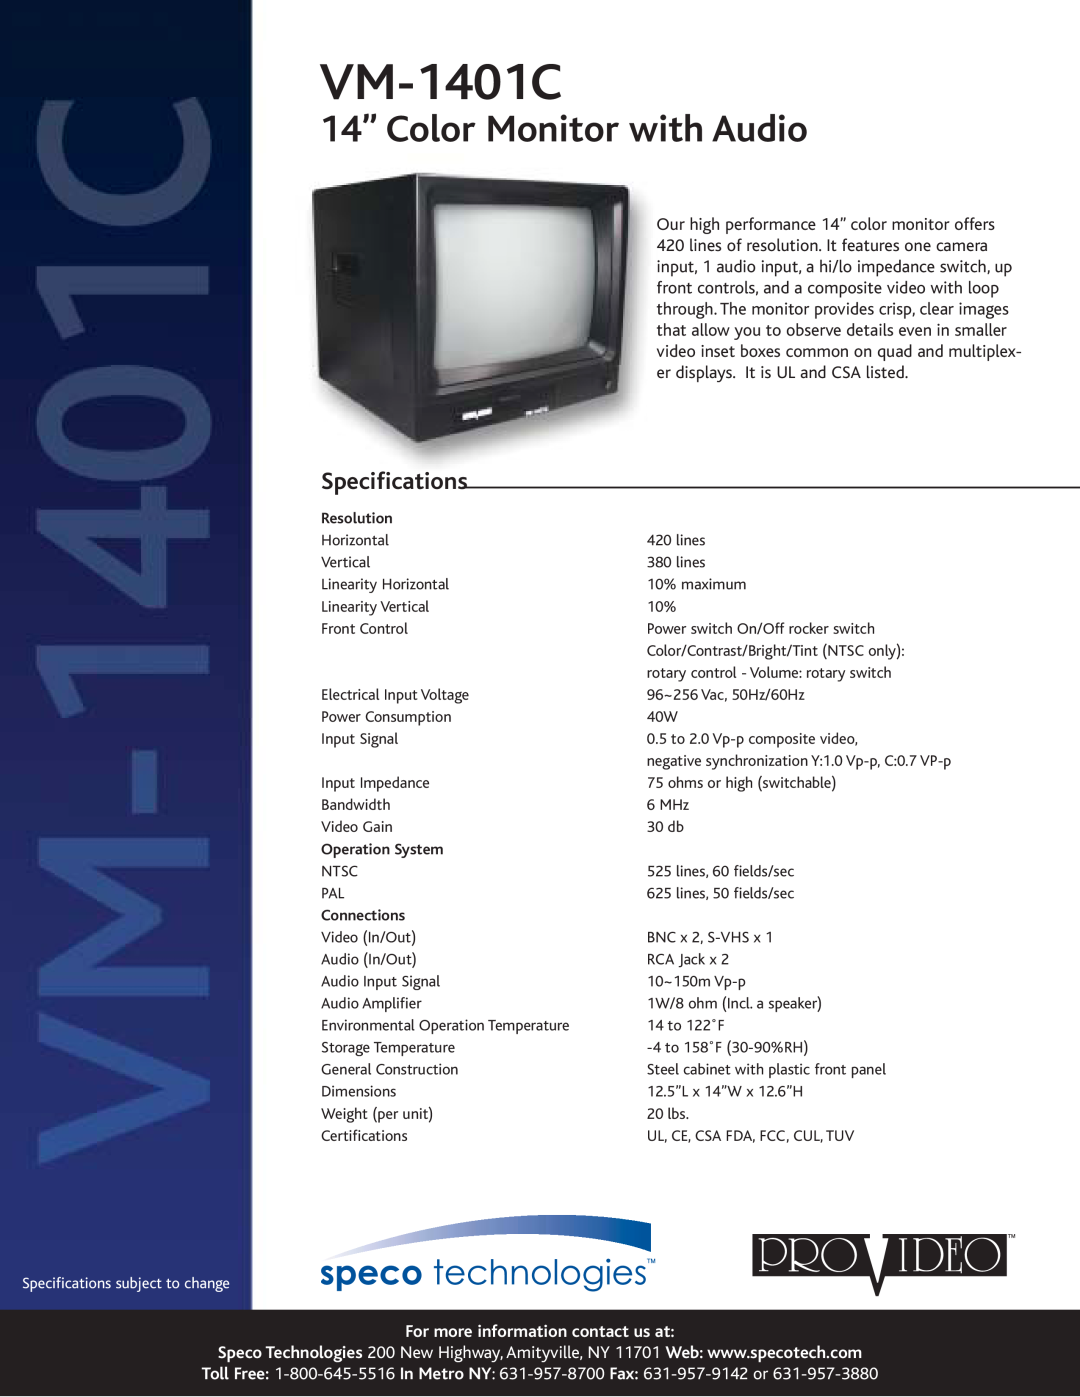 Speco Technologies VM-1401C specifications 14” Color Monitor with Audio, Specifications, Resolution, Operation System 